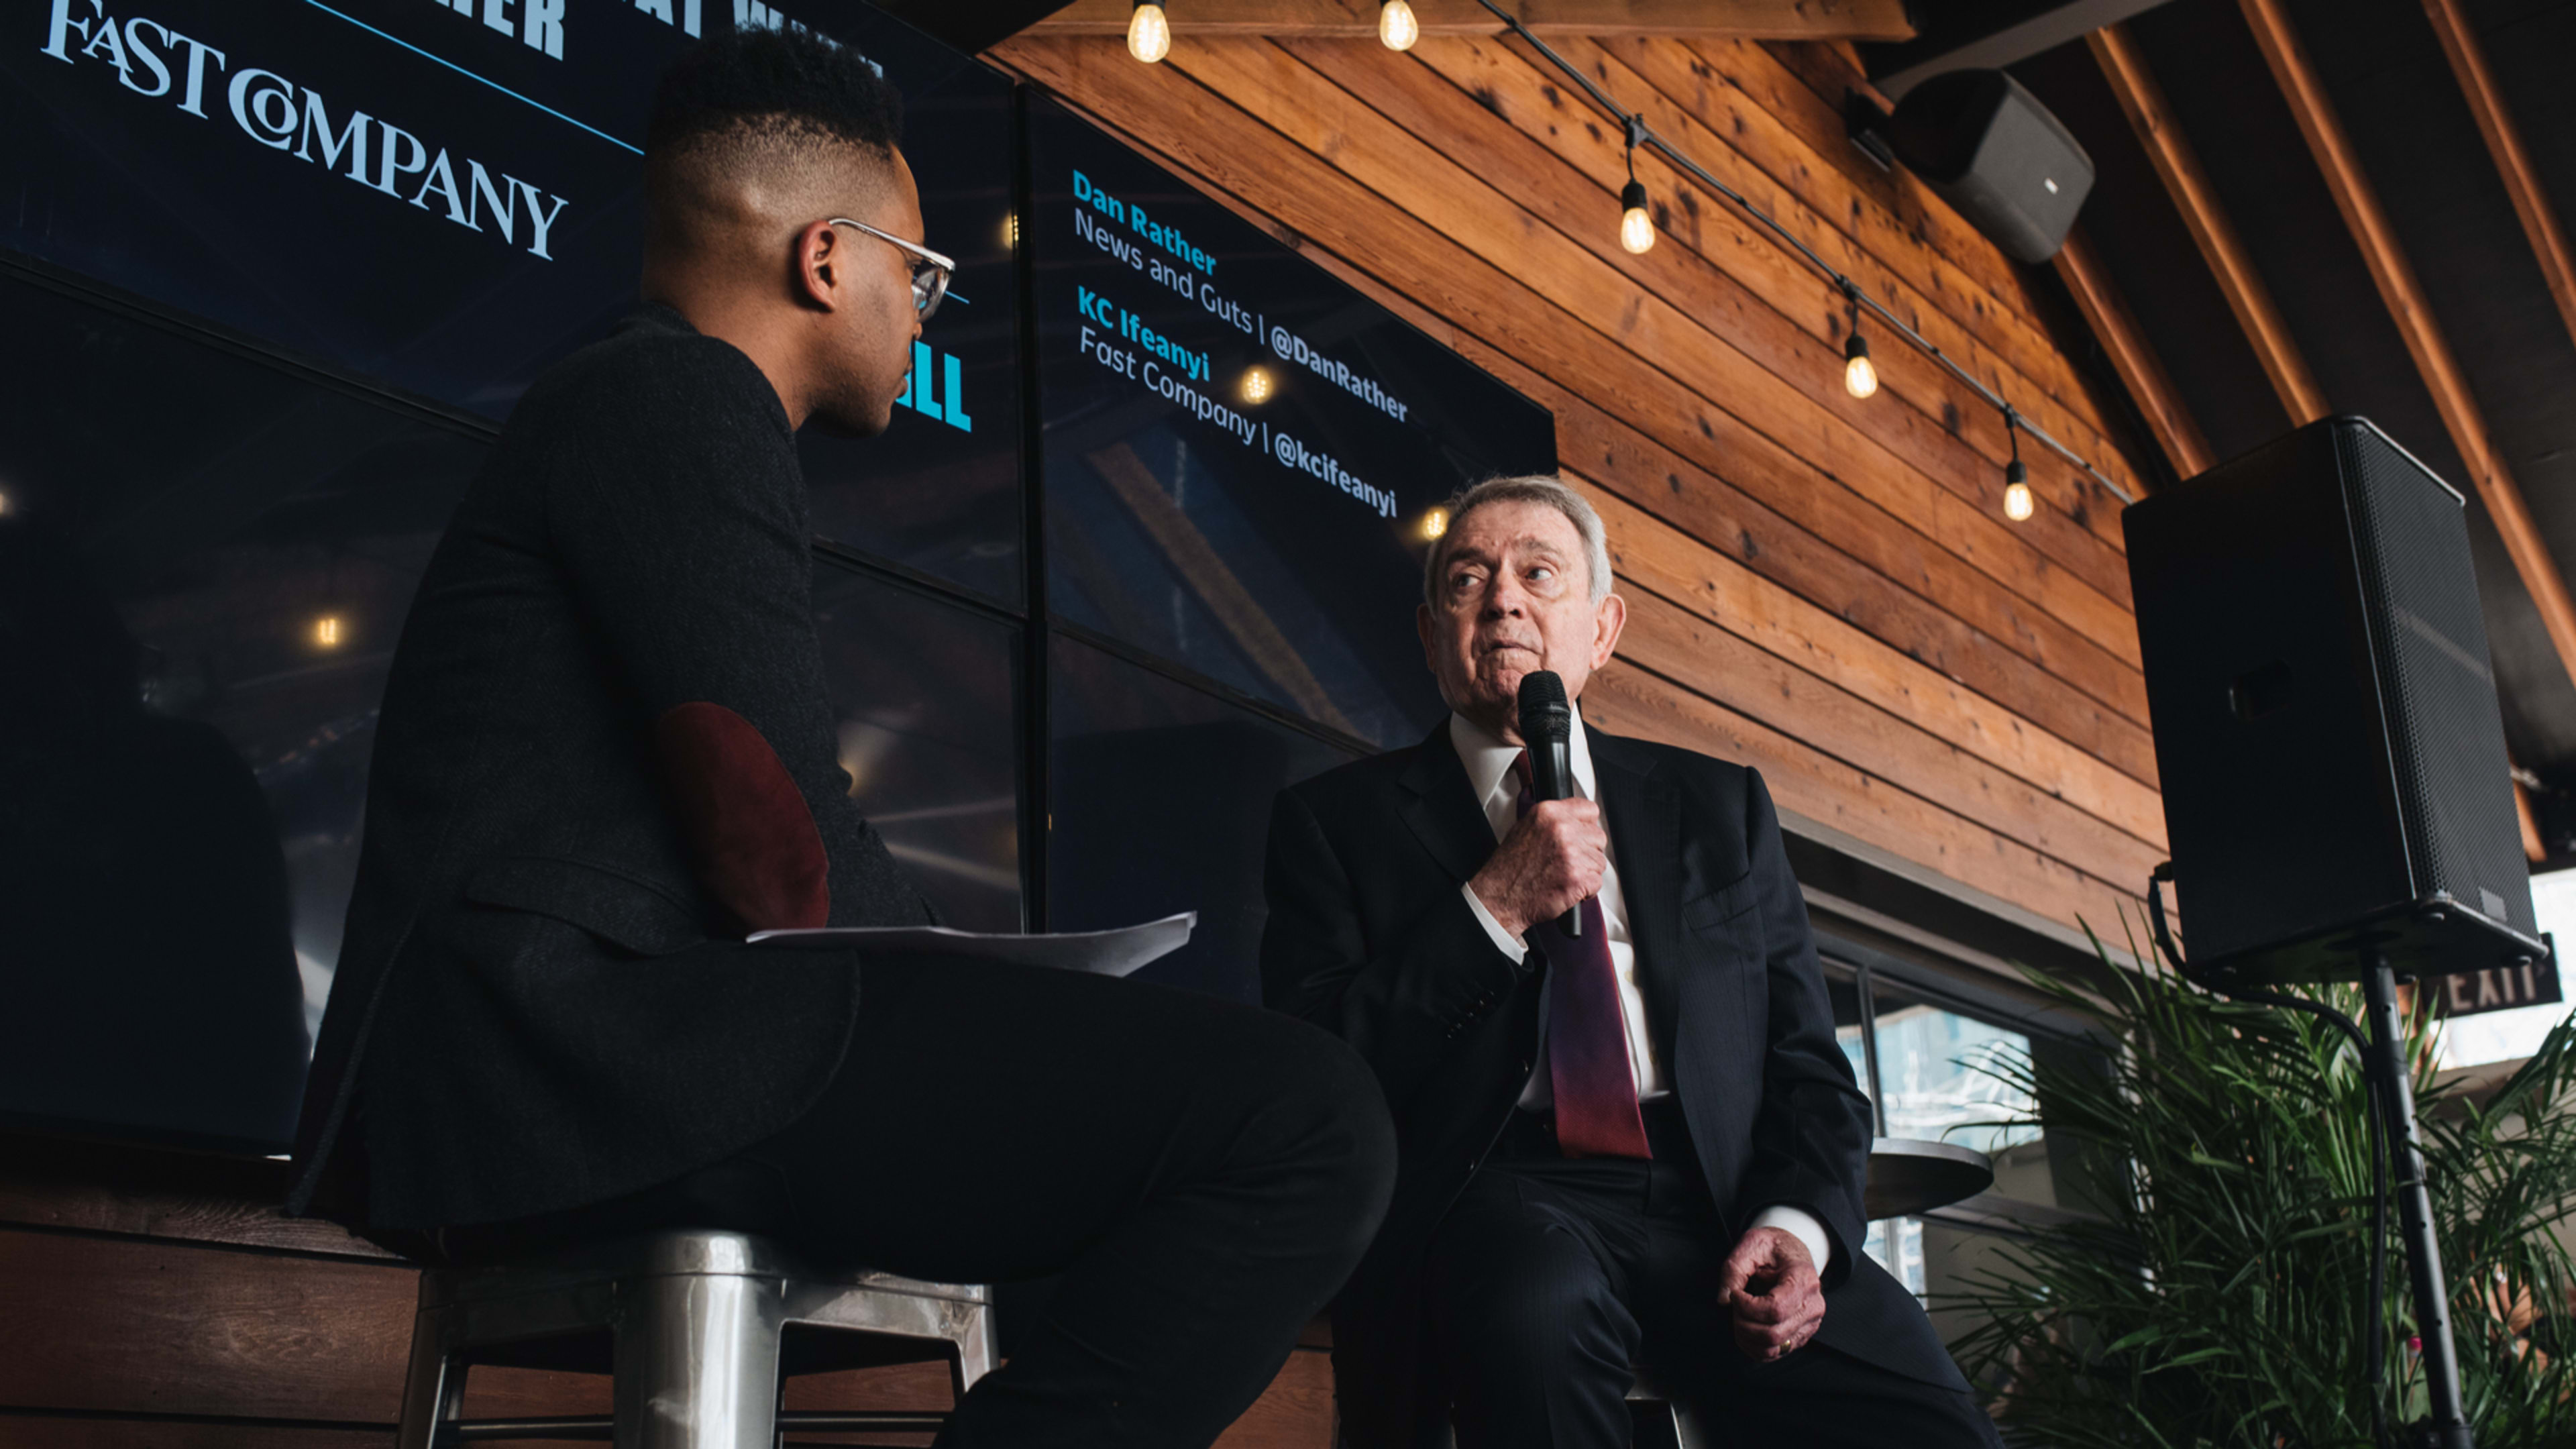 We need Dan Rather’s rousing speech on our divided country right now